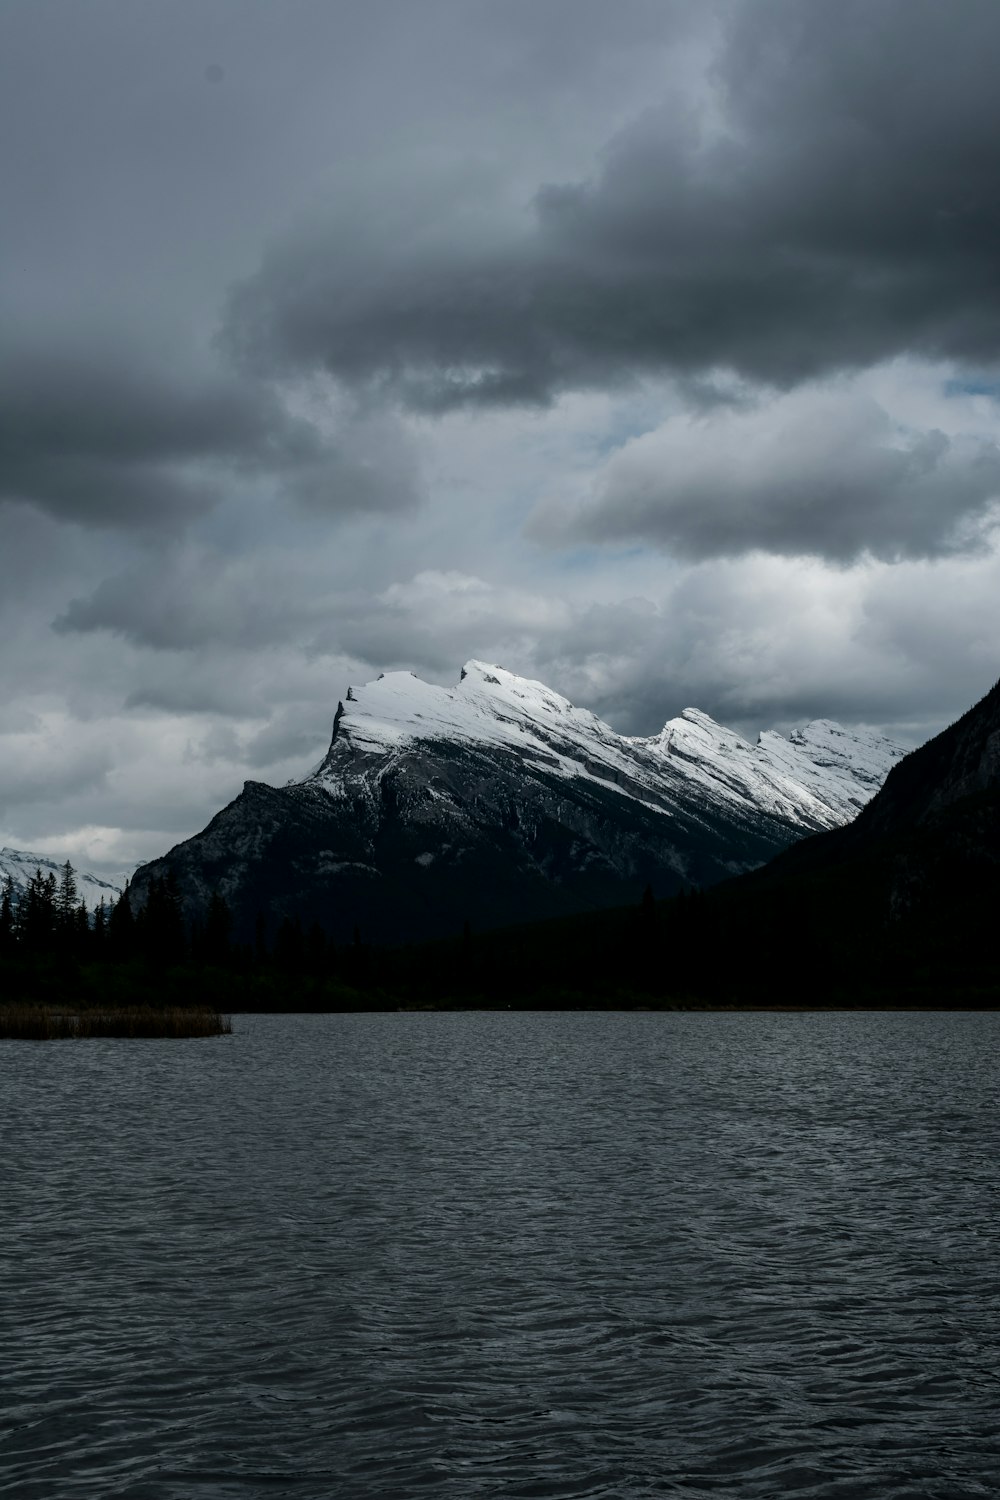 snow covered mountain near body of water under cloudy sky during daytime